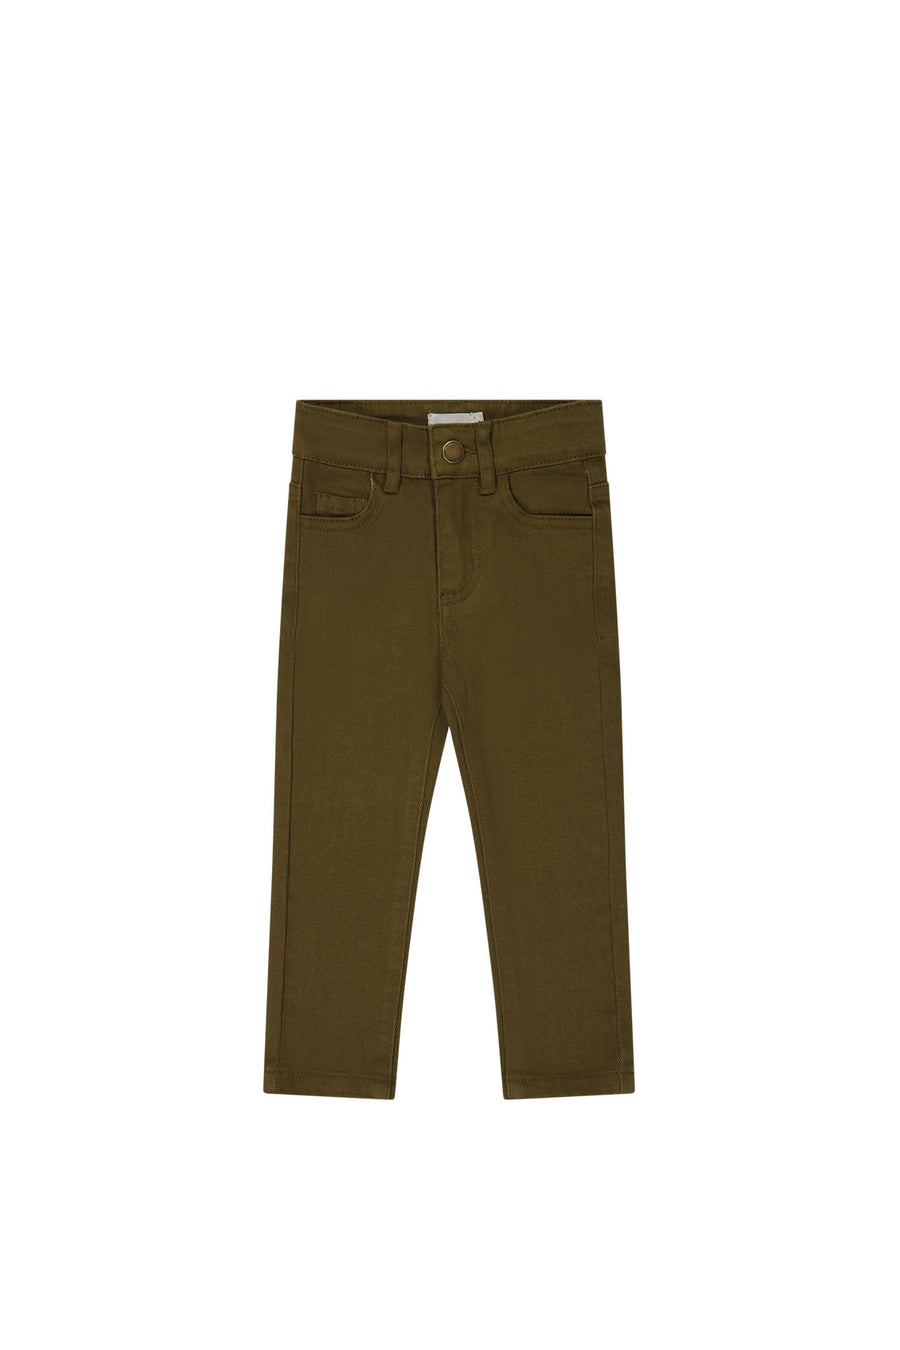 Austin Woven Pant - Dark Anise Childrens Pant from Jamie Kay USA